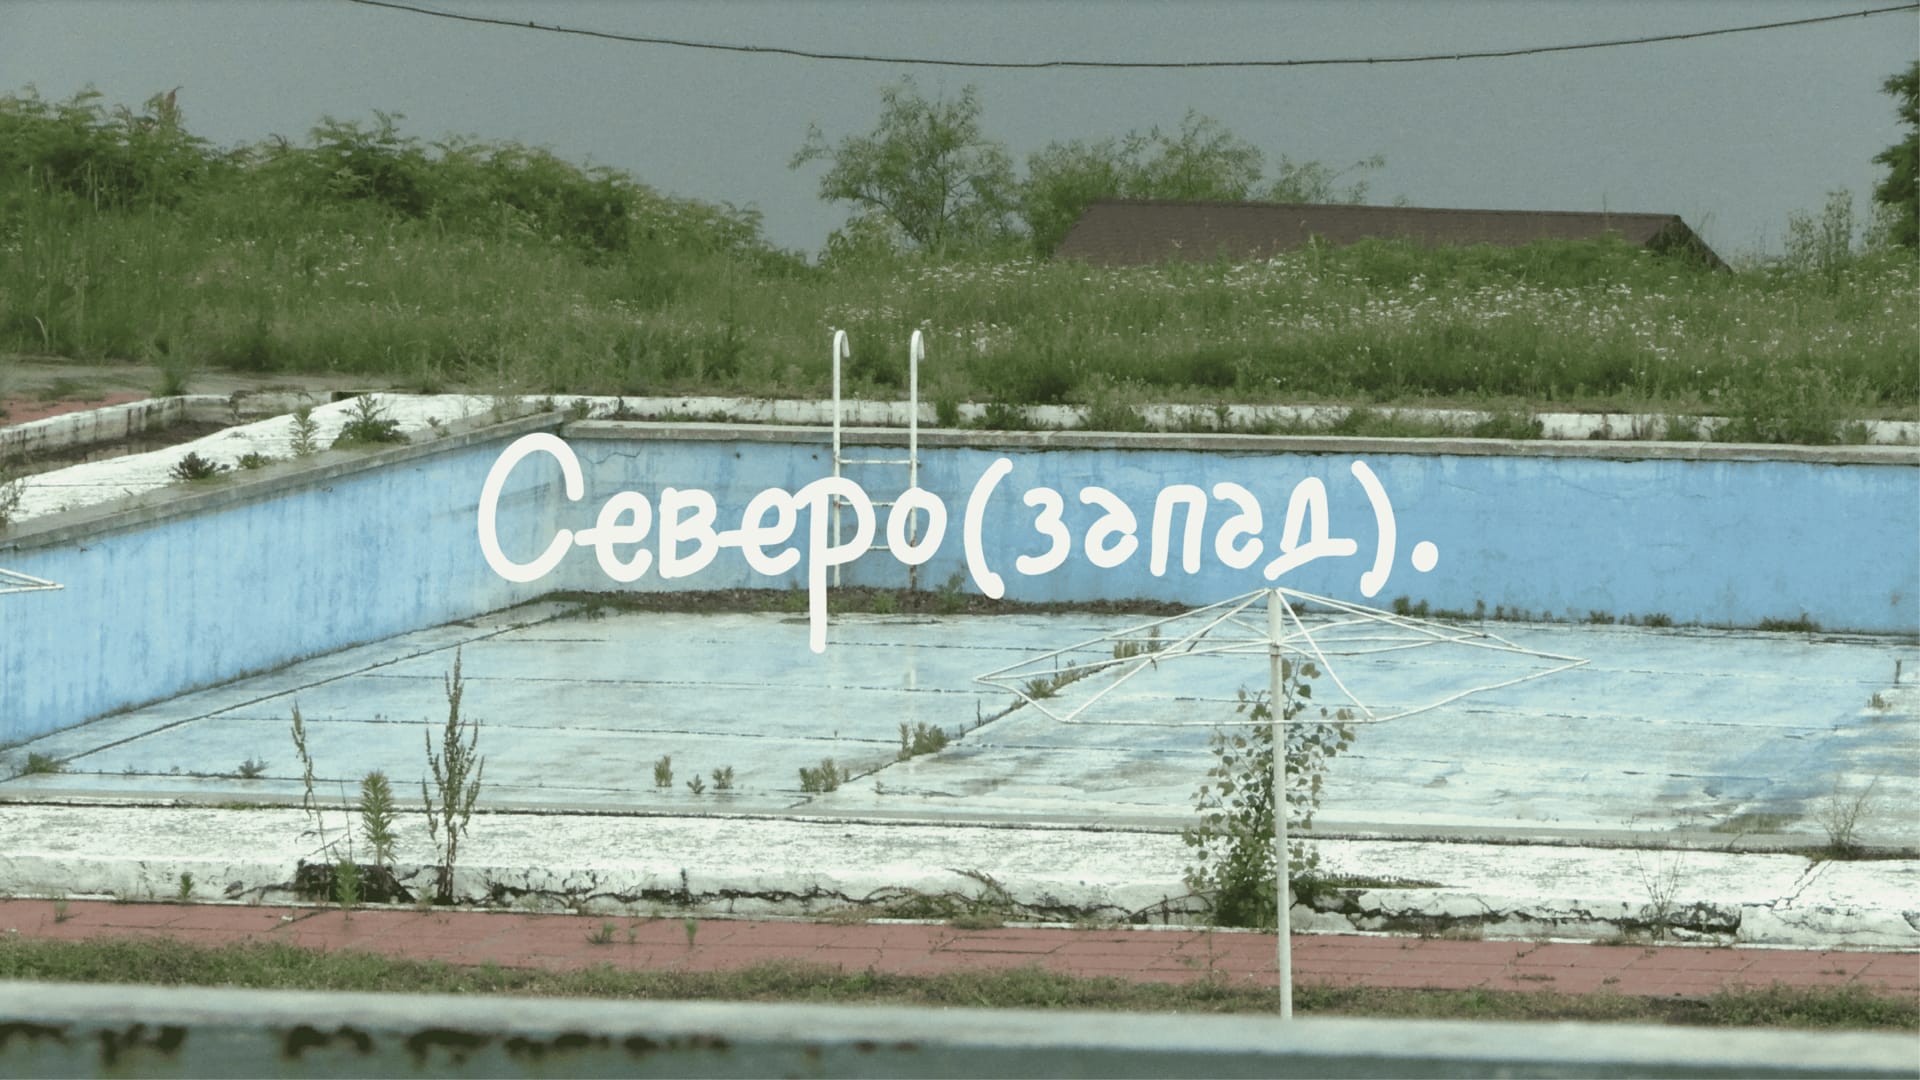 An empty swimming pool with a illustrated text in the middle of image.